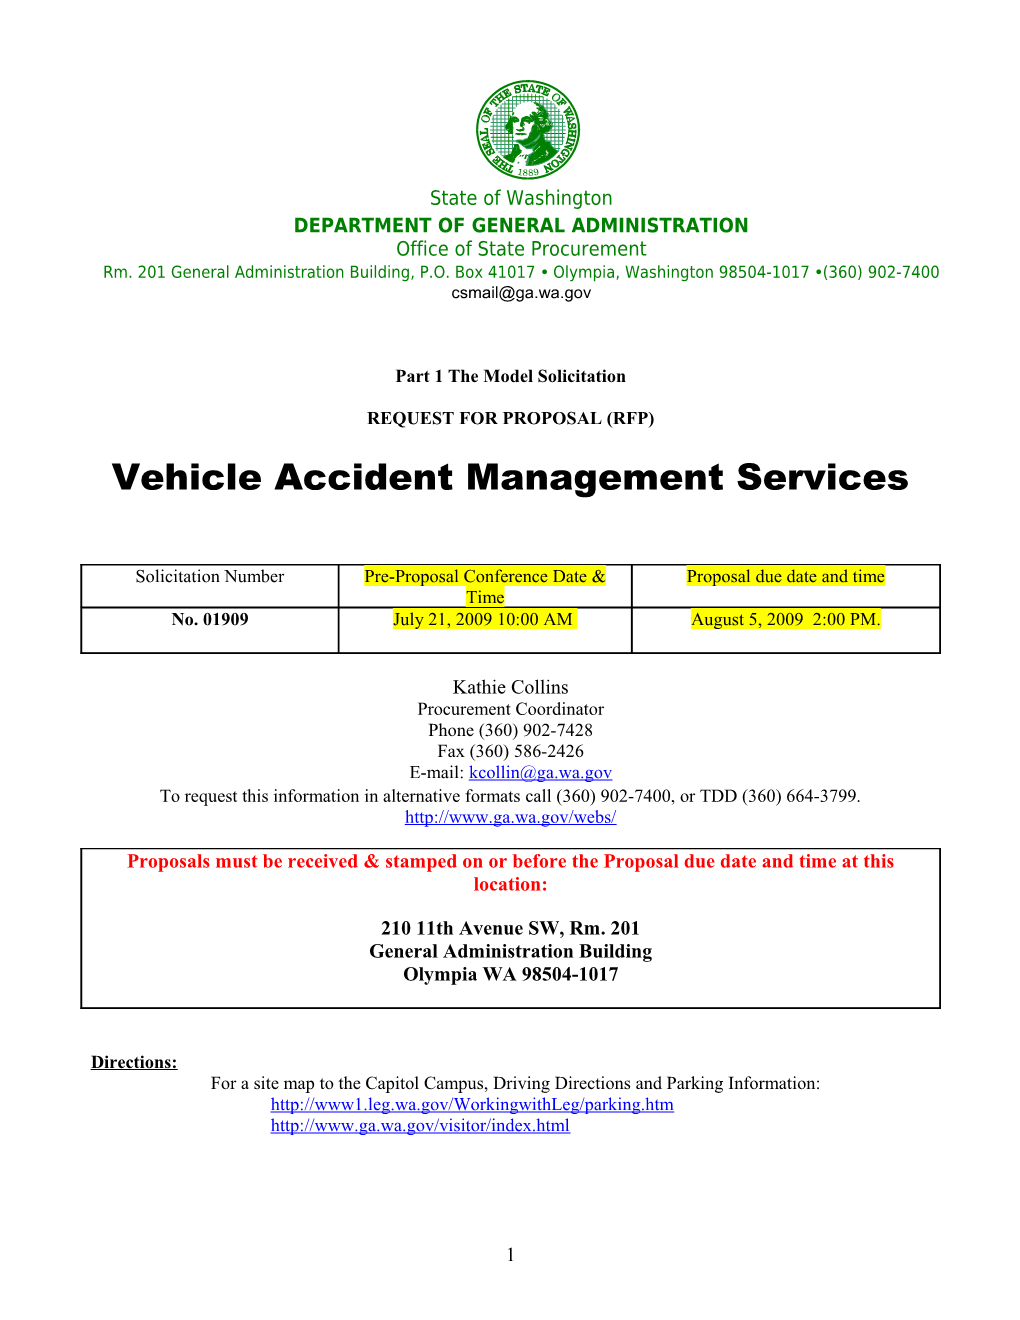 Vehicle Accident Management Services Request for Proposal #01909